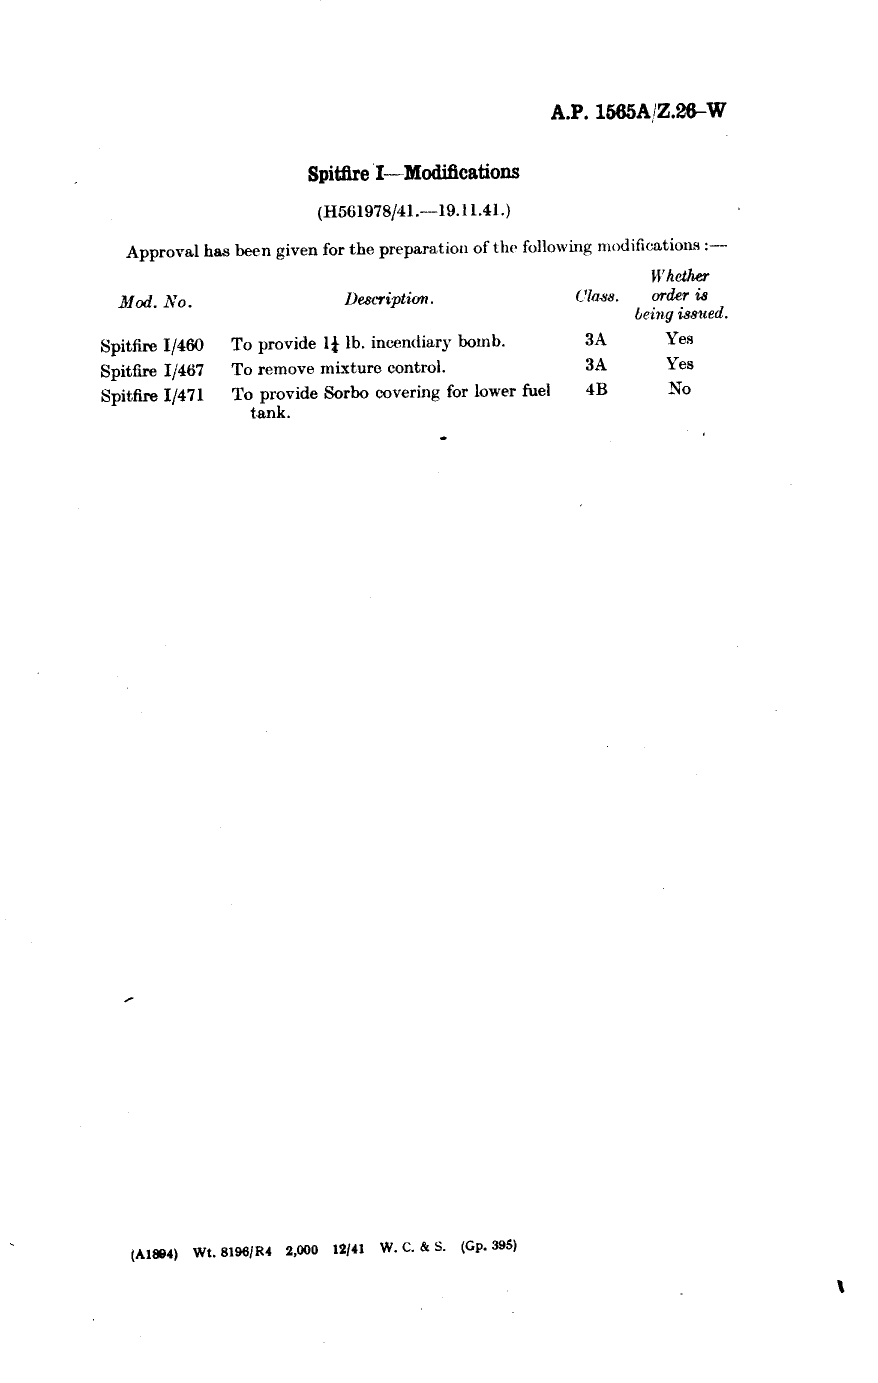 Sample page 1 from AirCorps Library document: Spitfire I Modifications 460, 467 and 471